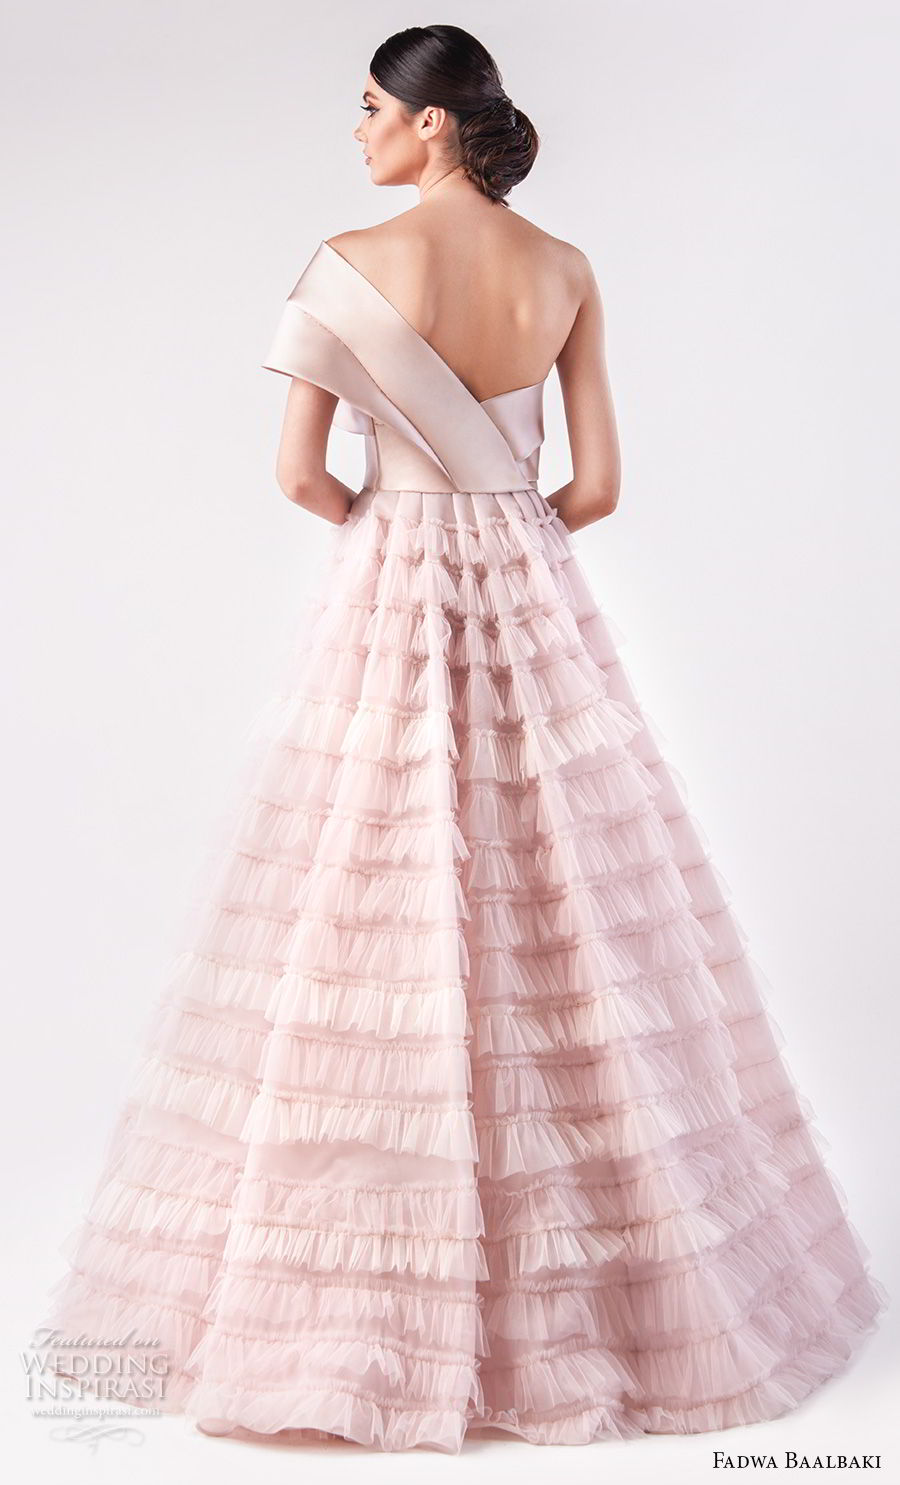 fadwa baalbaki spring 2018 couture one shoulder tiered bodice ruffled skirt romantic pink a  line wedding dress (7) bv